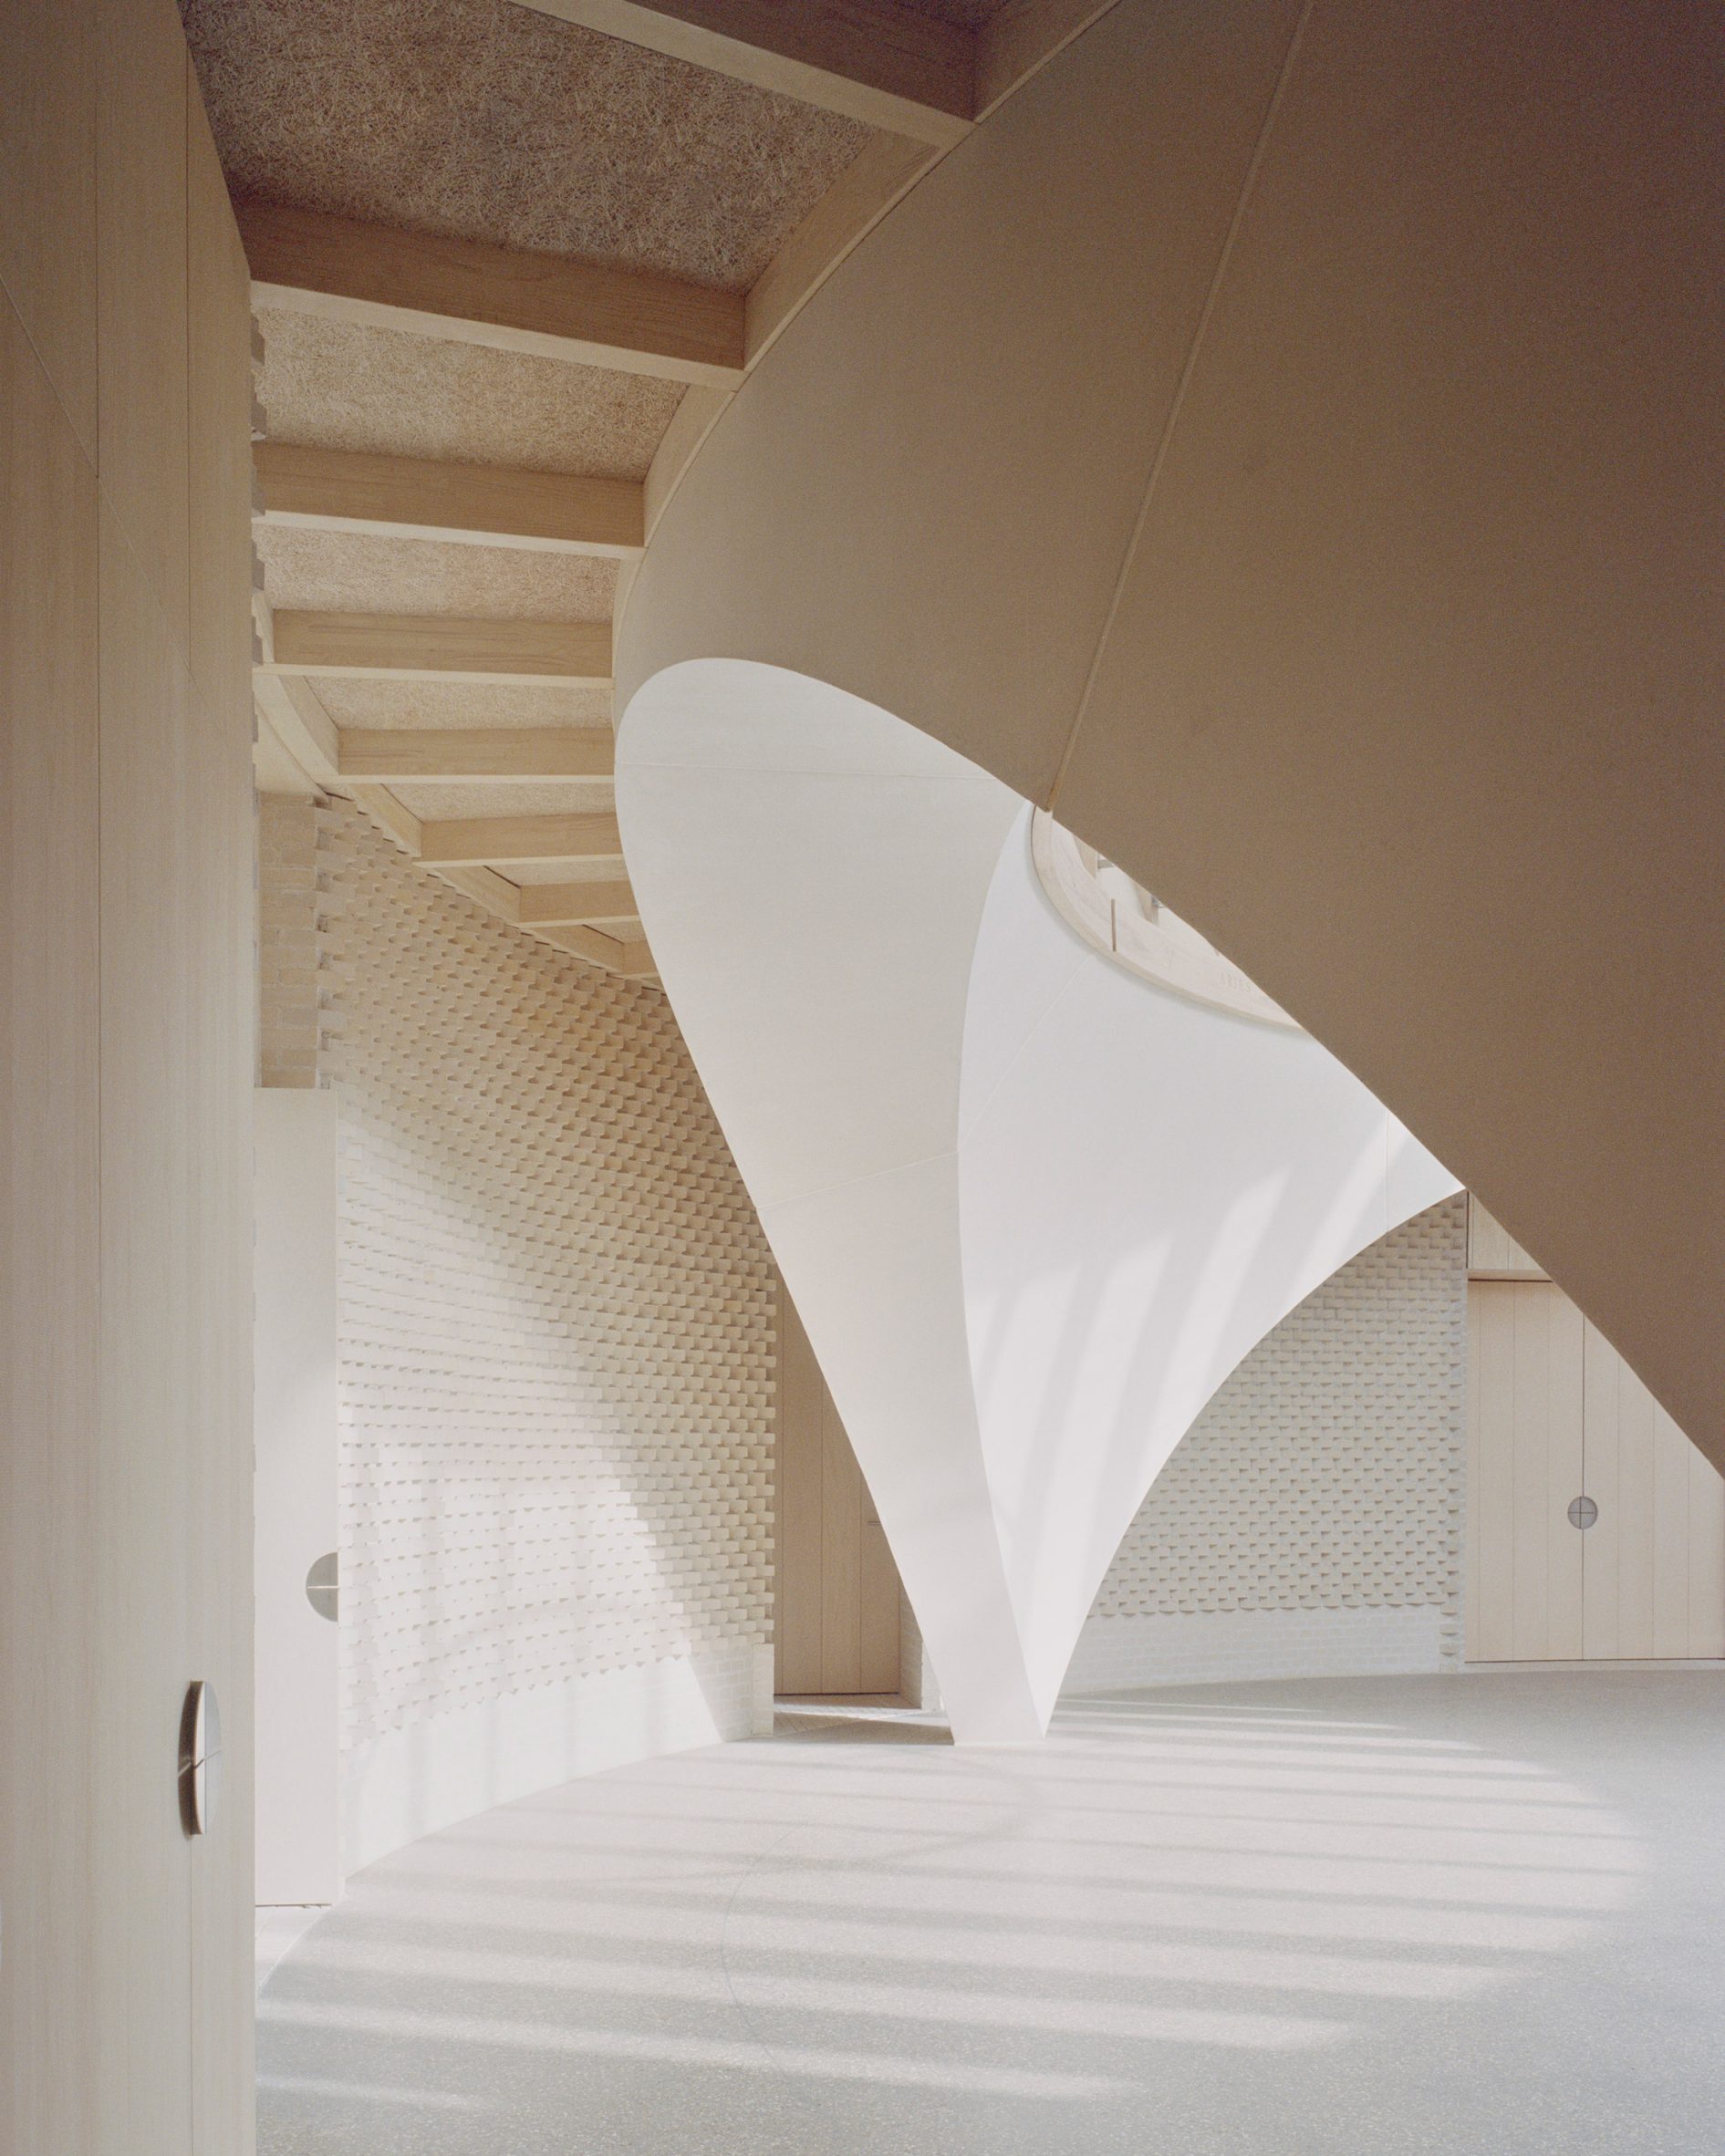 Interior of Hampshire temple by James Gorst Architects